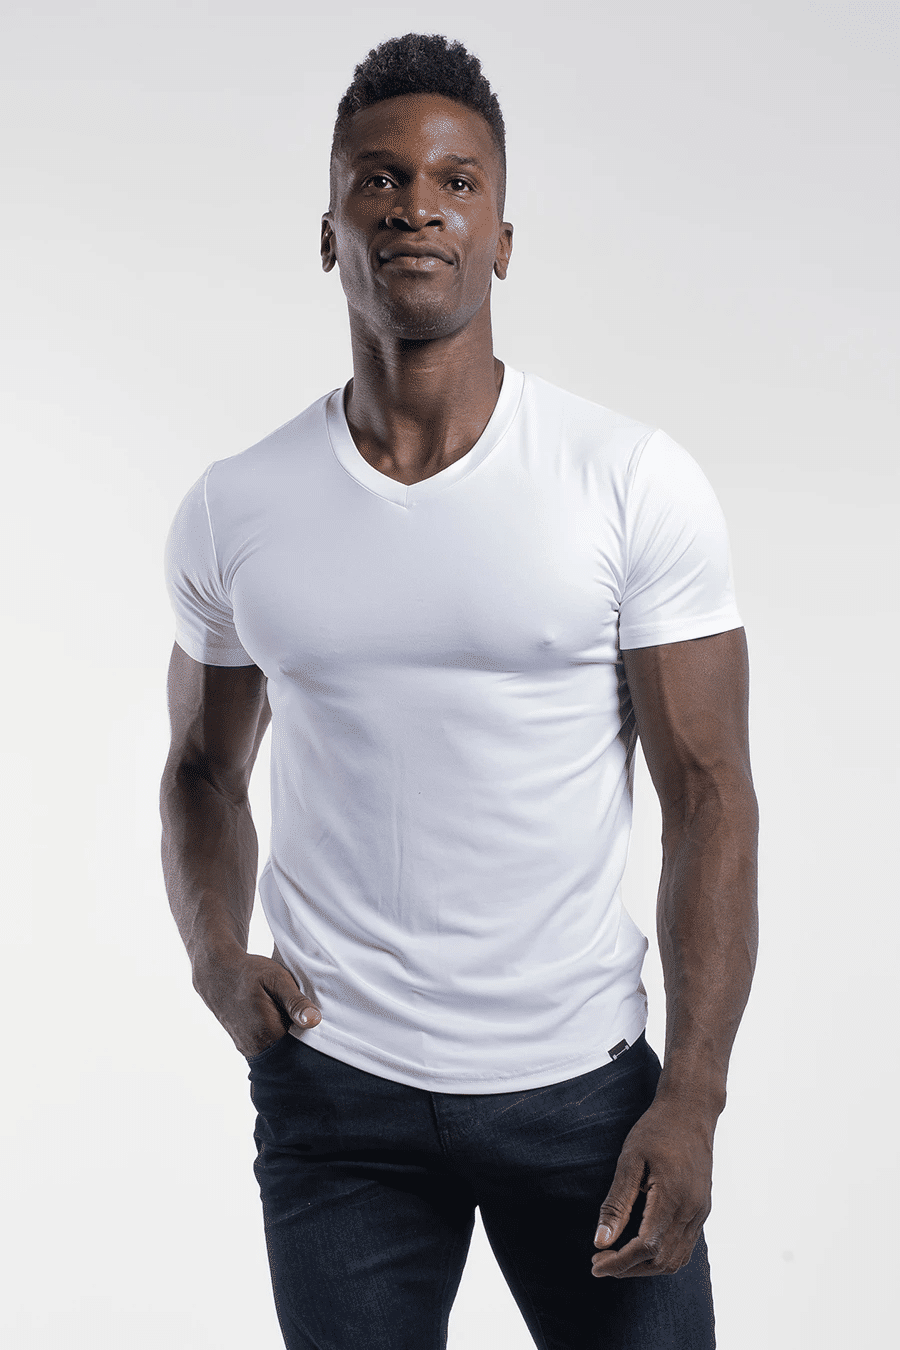 Best Shirts For Men With Skinny Arms - How To Make Small Arms Look Big